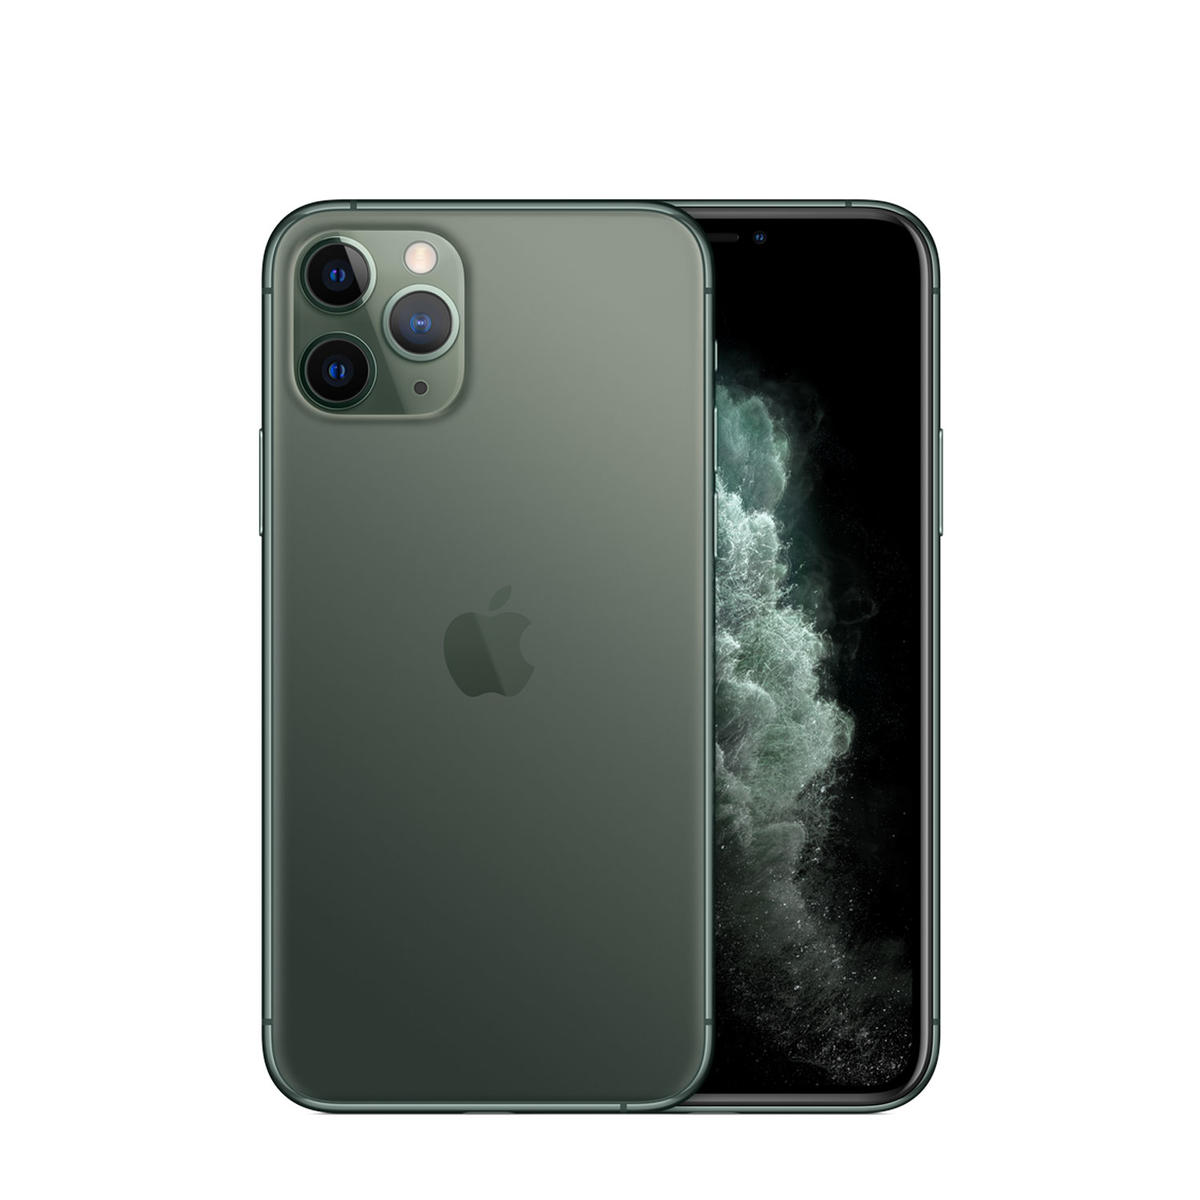 https://www.macnificos.com/sites/files/styles/product_page_zoom/public/images/product/iphone-11-pro-verde.jpg?itok=scPQSb1Q